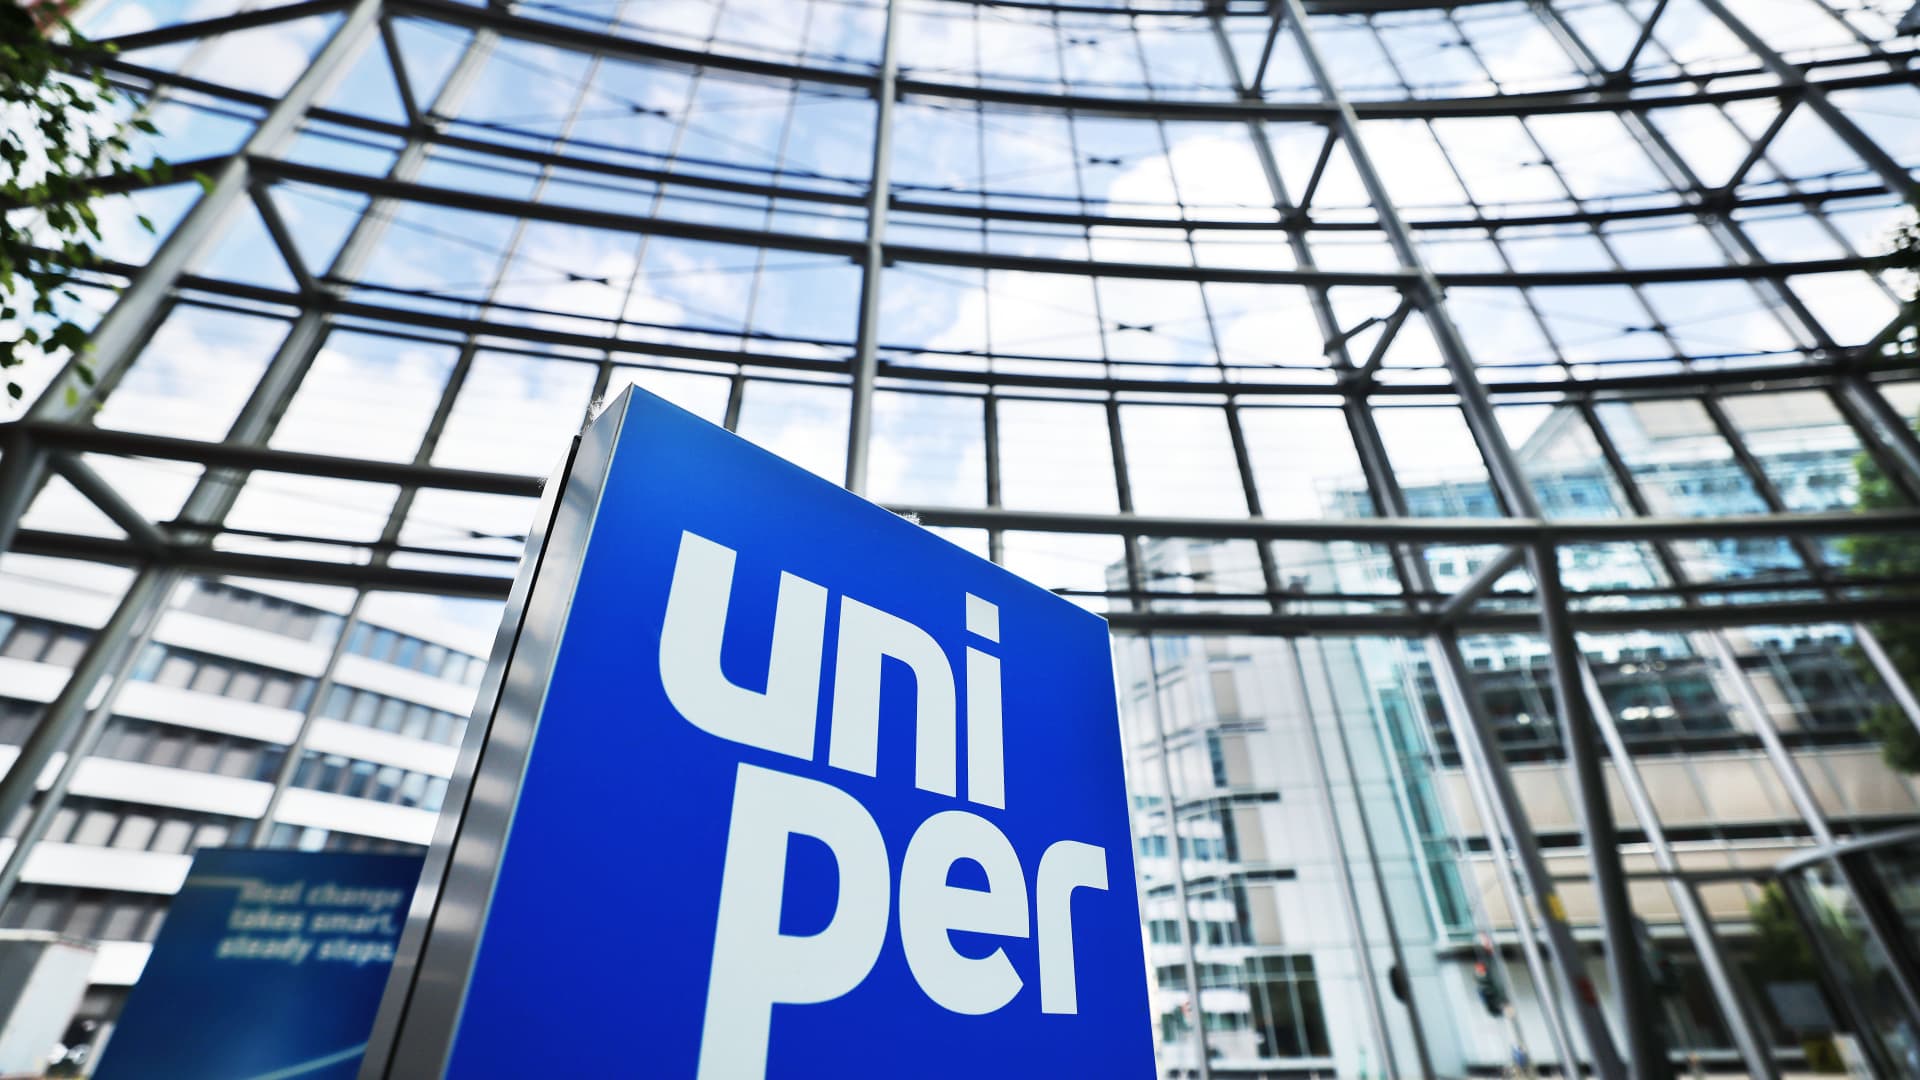 Uniper has received billions in financial aid from the German government as a result of surging gas and electric prices following Russia's war in Ukraine.